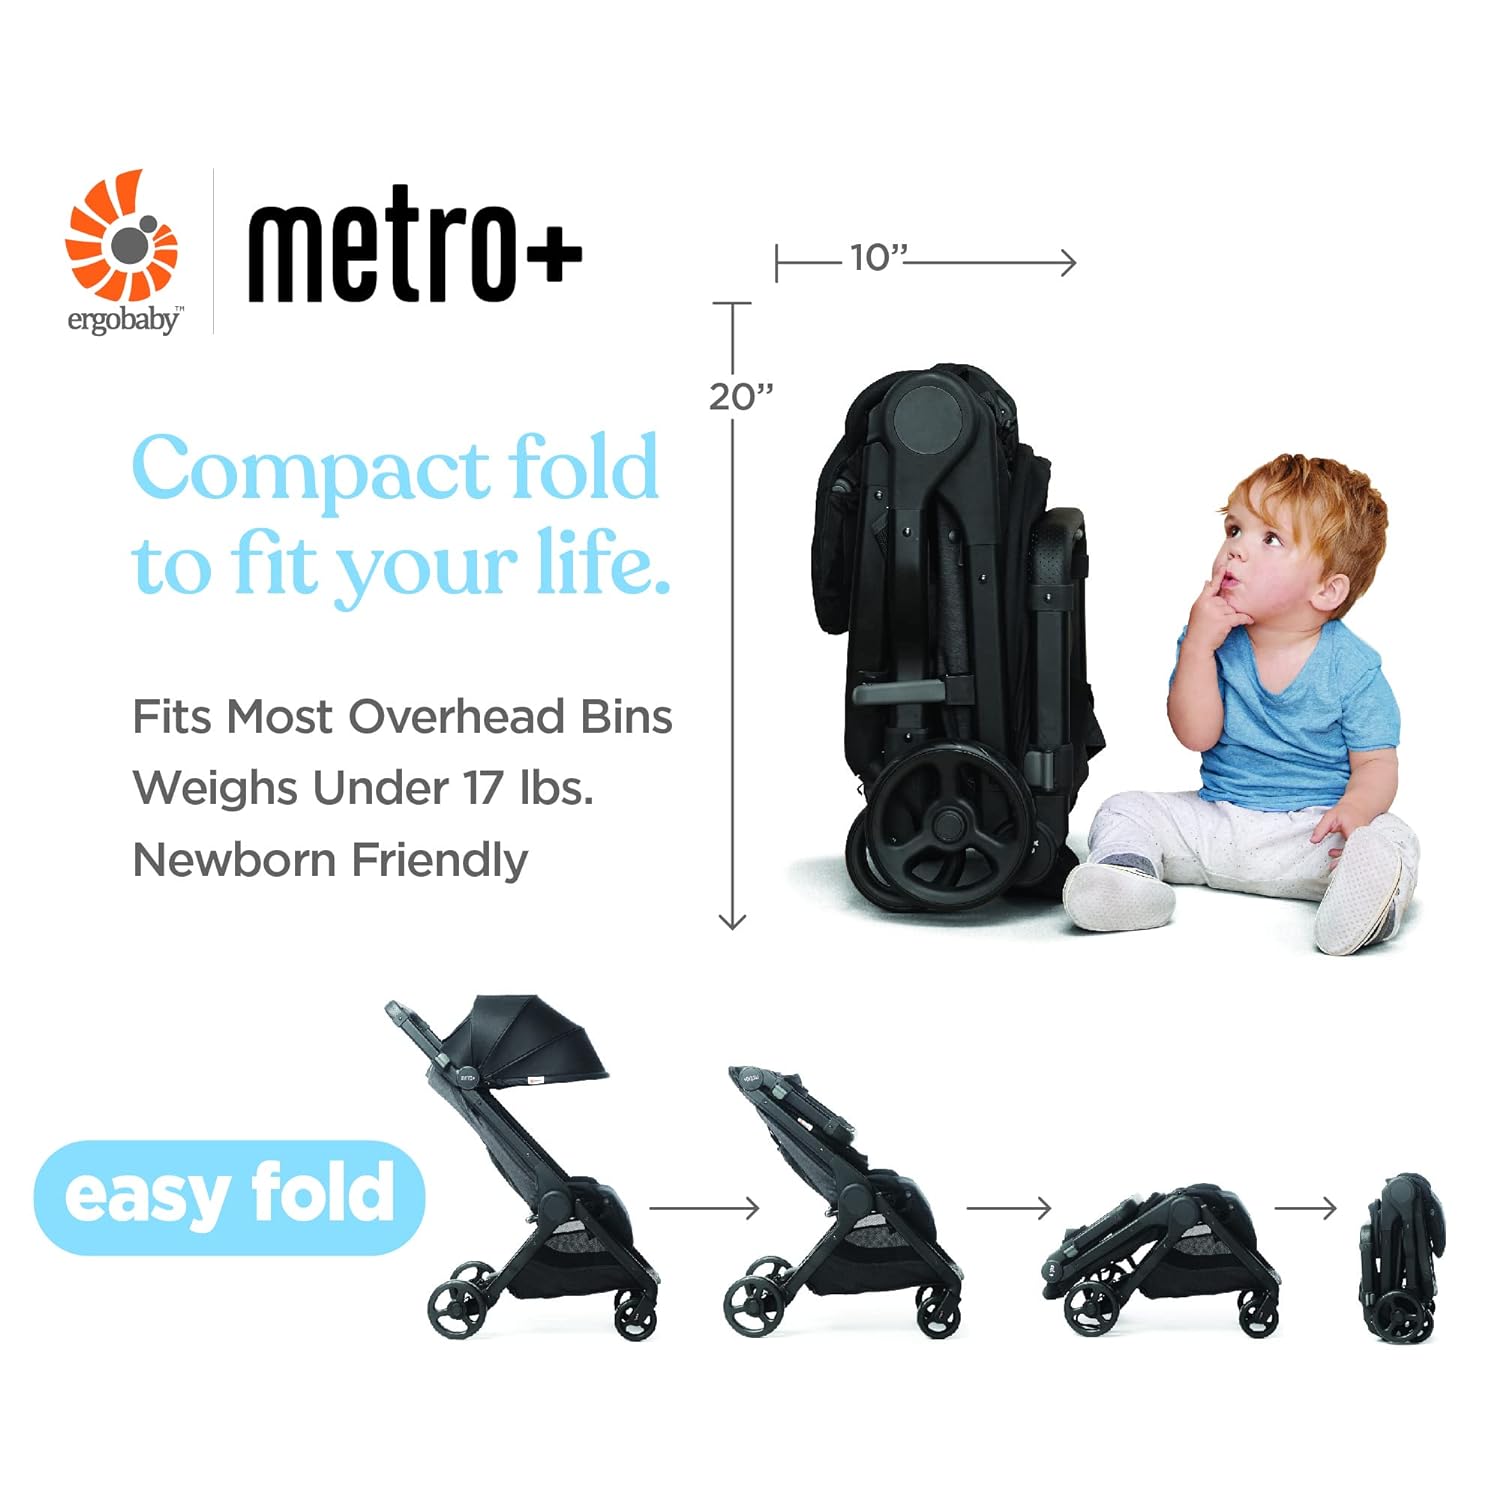 Ergobaby Metro+ Compact Baby Stroller, Lightweight Umbrella Stroller Folds Down for Overhead Airplane Storage (Carries up to 50 lbs), Car Seat Compatible, Black - Ergobaby Metro+ Compact Baby Stroller Review